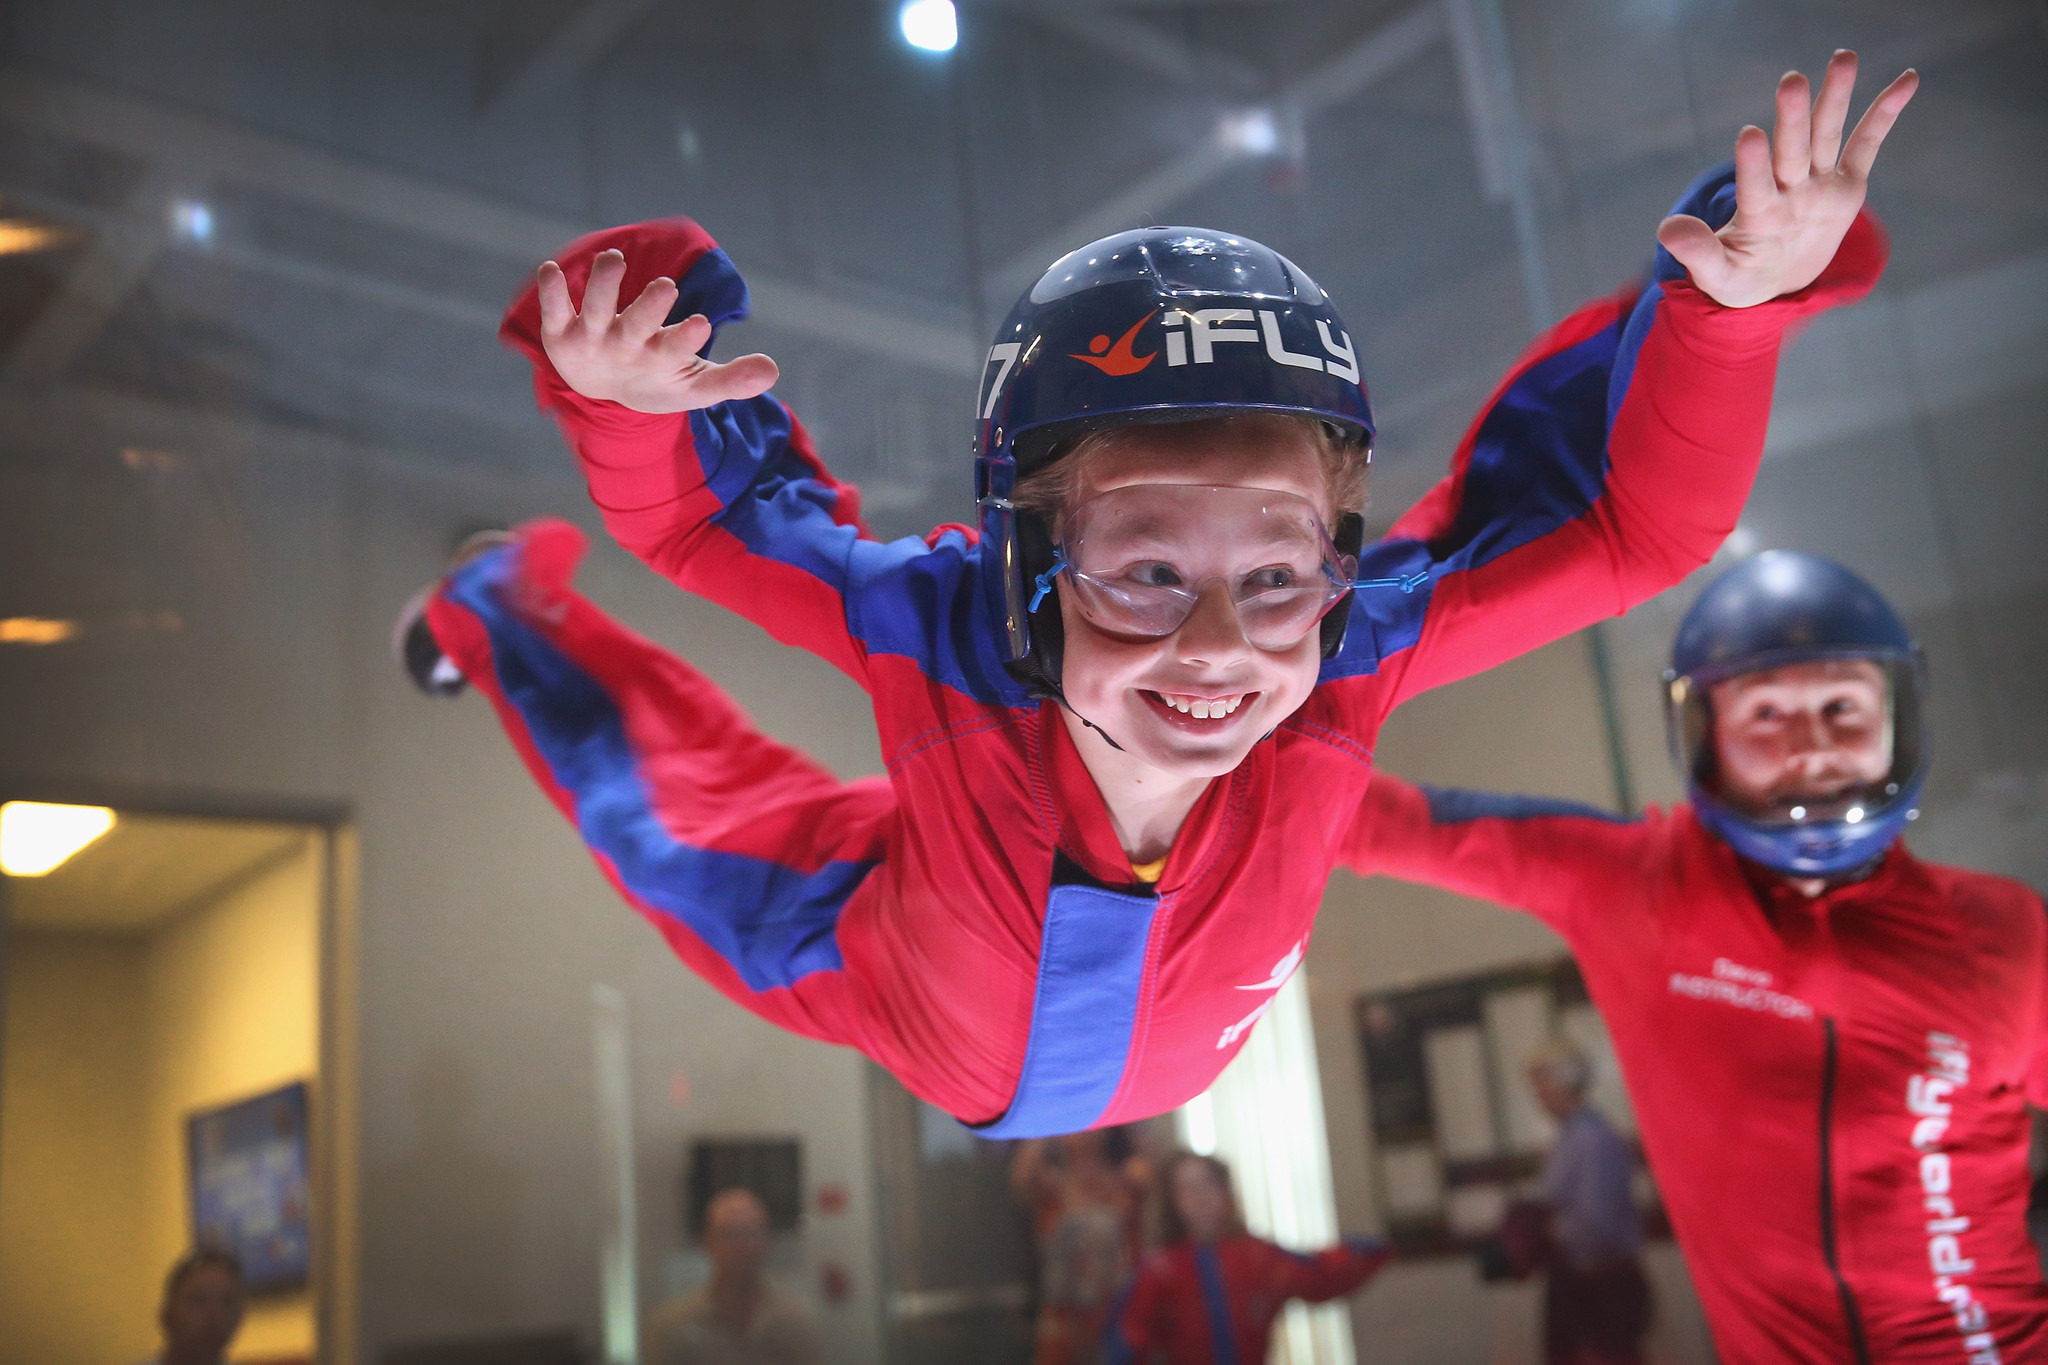 Indoor Skydiving For Kids
 100 things to do with your kids in Orlando this summer